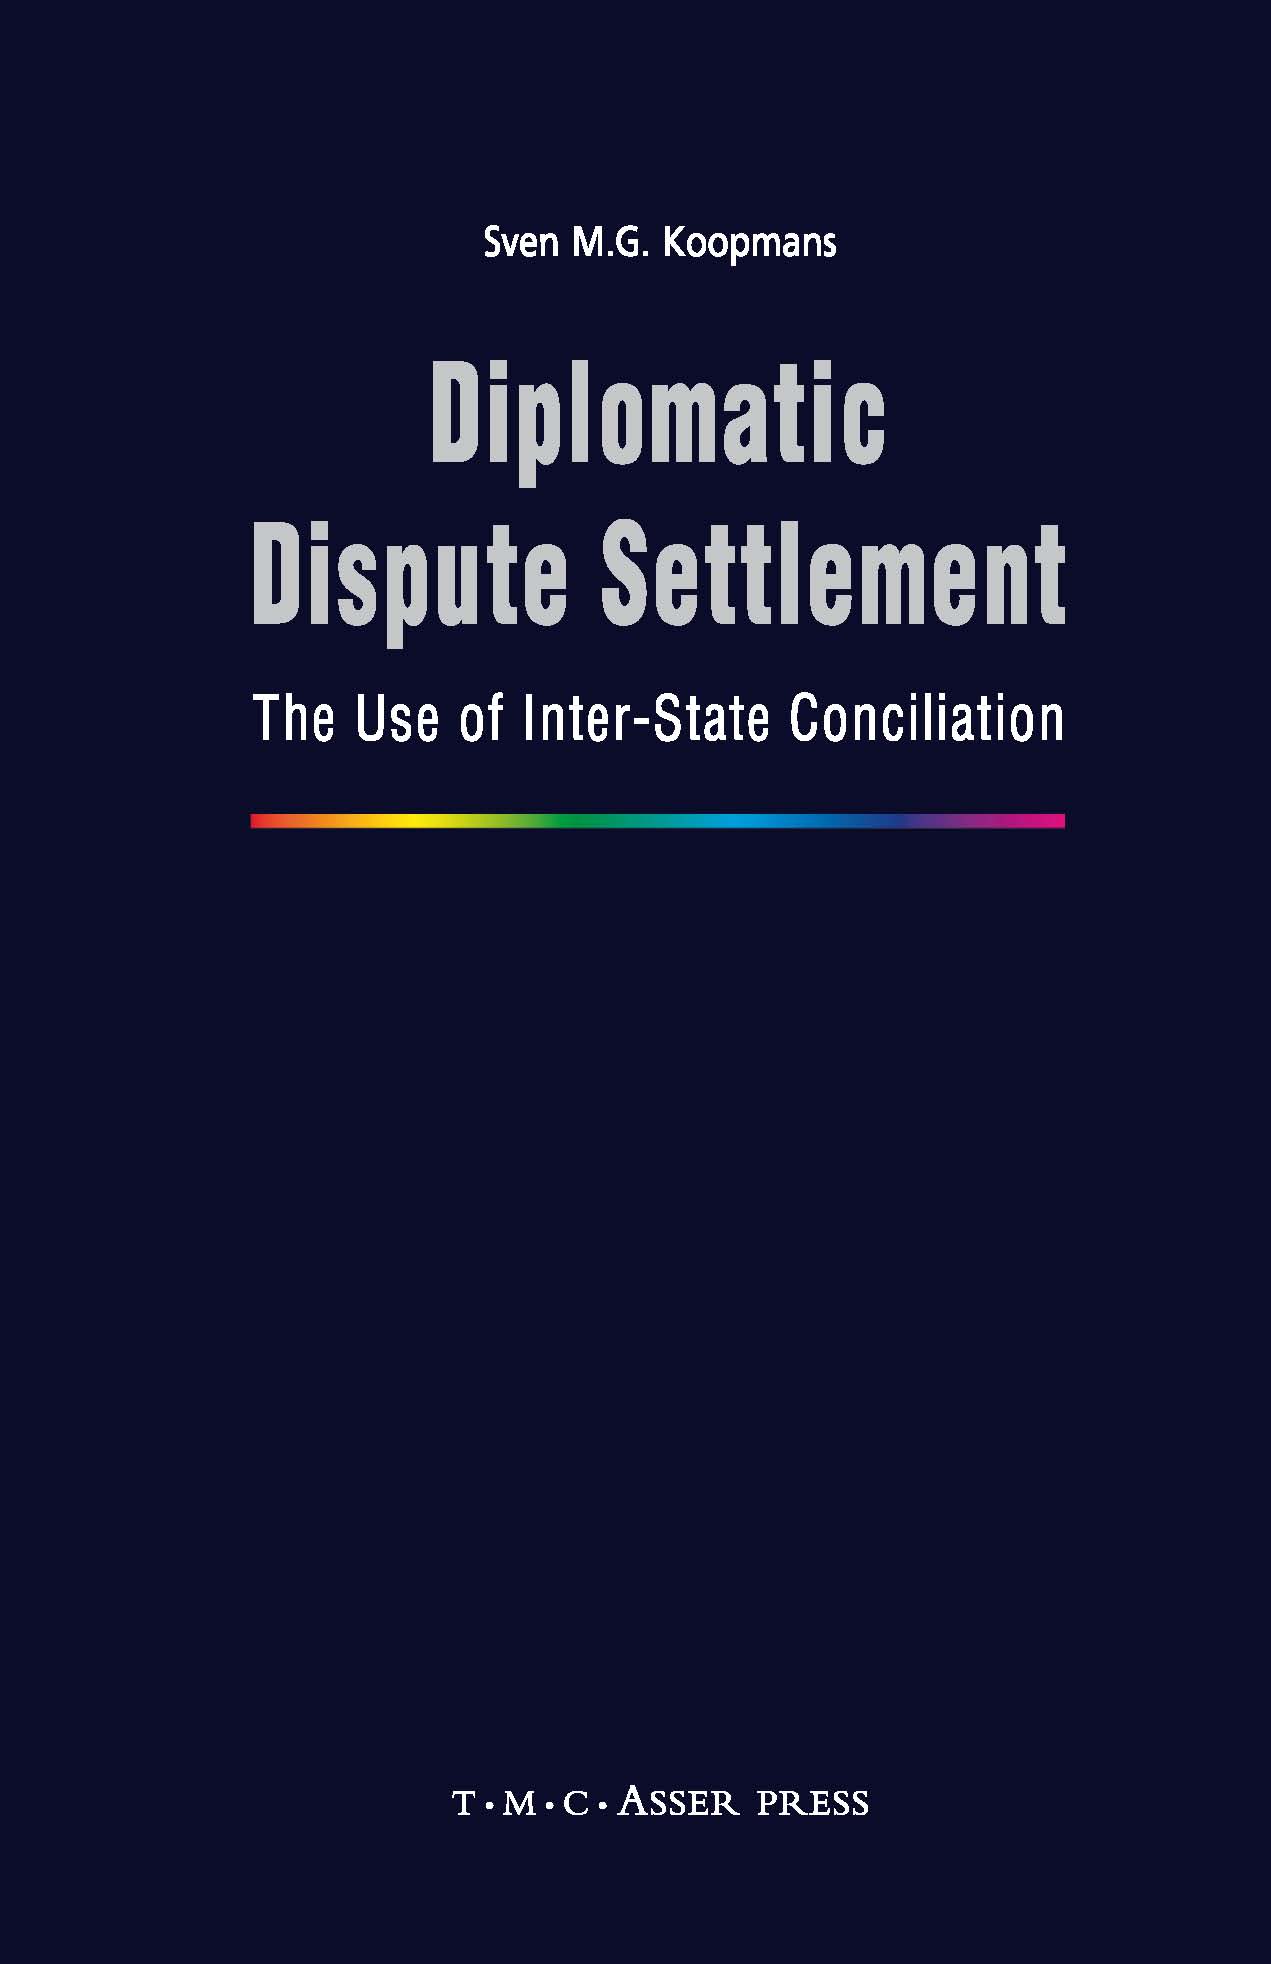 Diplomatic Dispute Settlement - The Use of Inter-State Conciliation